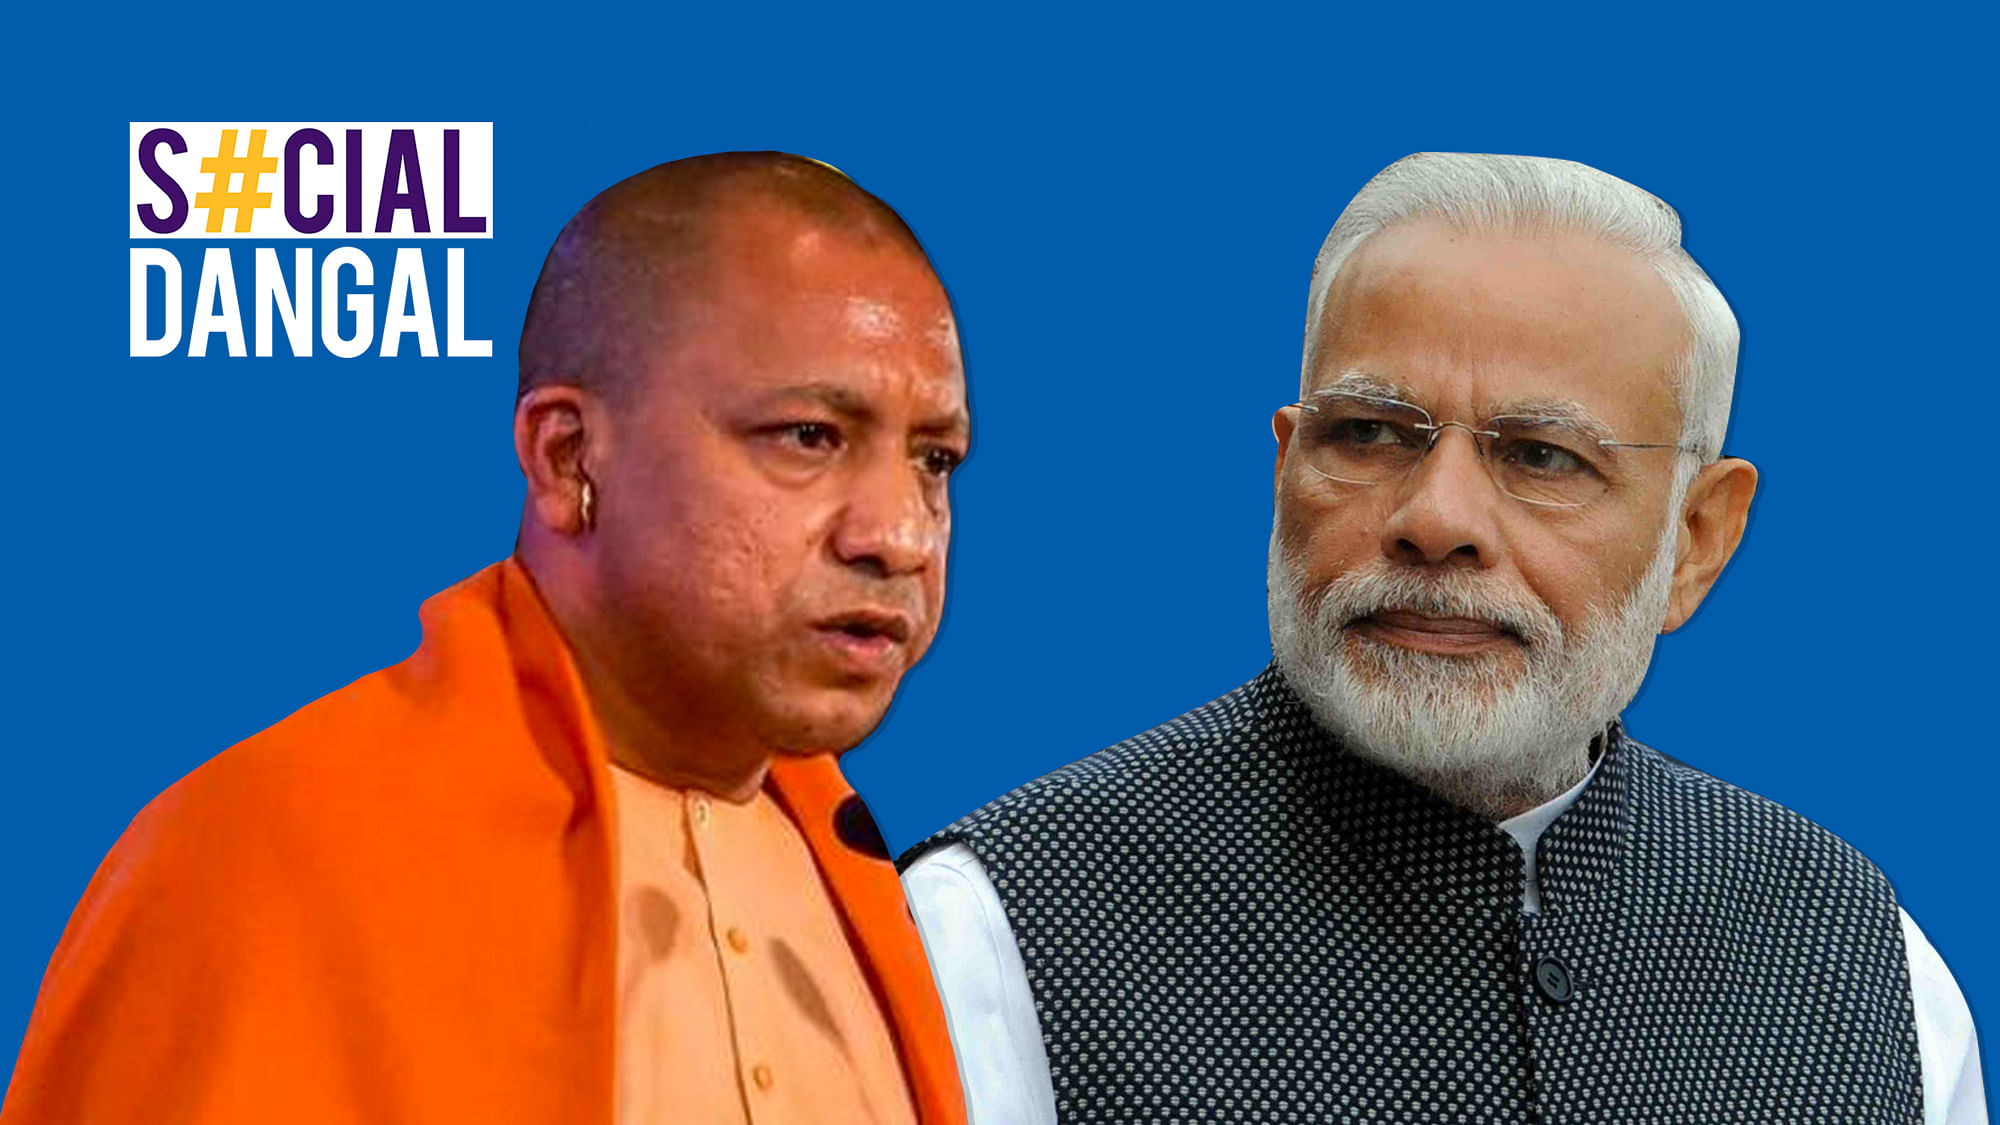 Both Yogi Adityanath and Narendra Modi seem to have violated the EC guidelines in their campaign speeches.&nbsp;